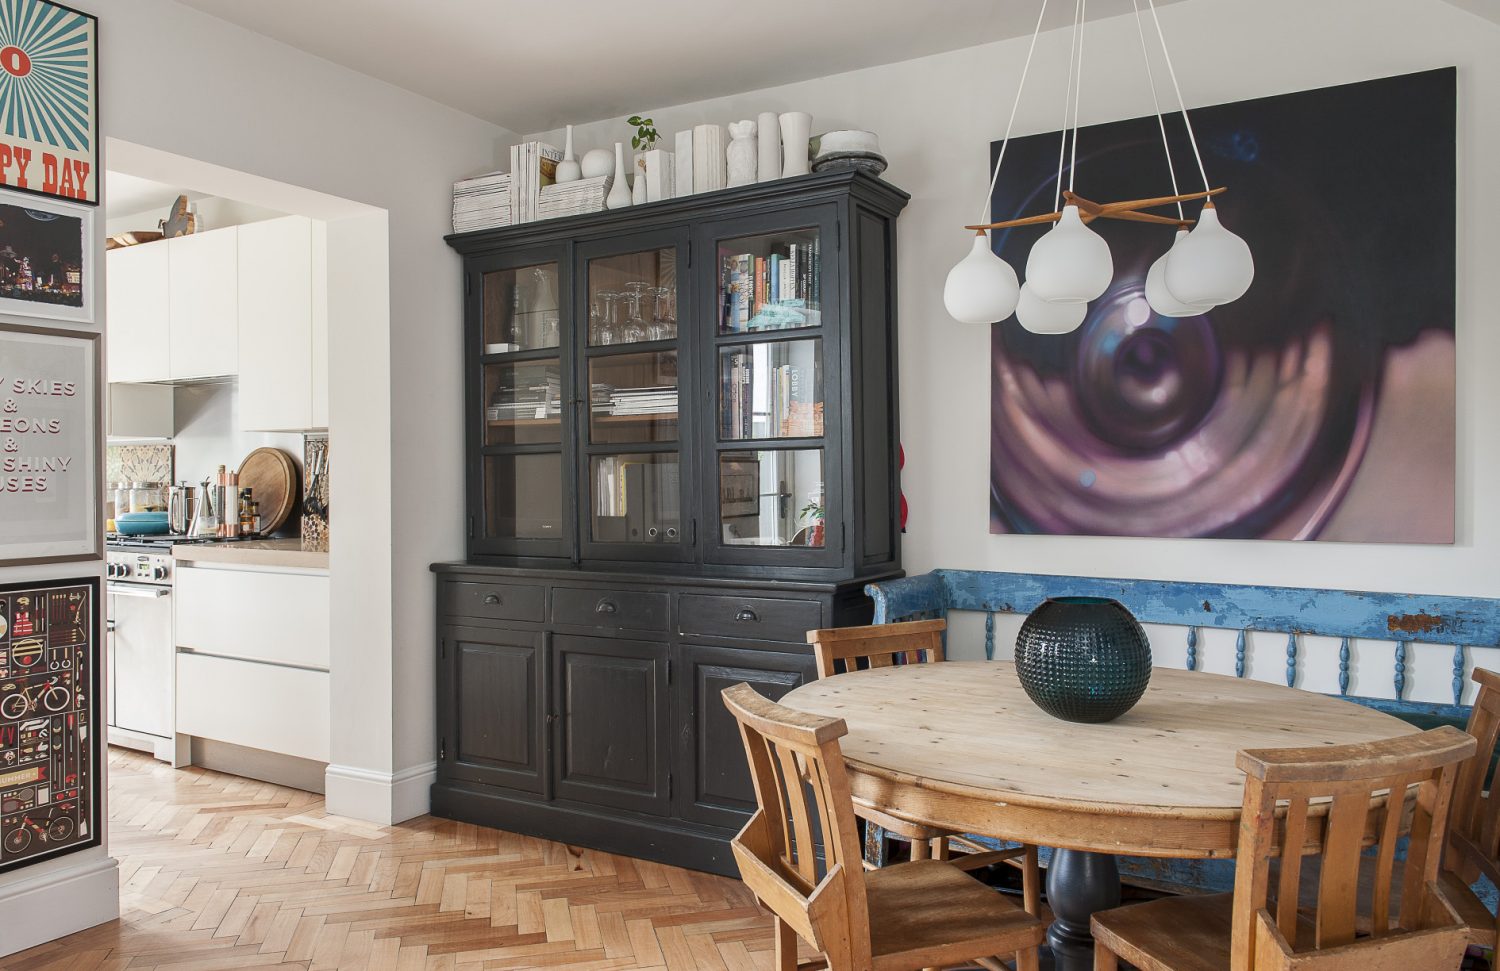 The open-plan kitchen and dining area both feature reclaimed parquet flooring, interconnecting the rooms and making the whole area feel light and bright. The kitchen, which now opens directly on to the garden was once dark and cluttered and accessed via a dining room